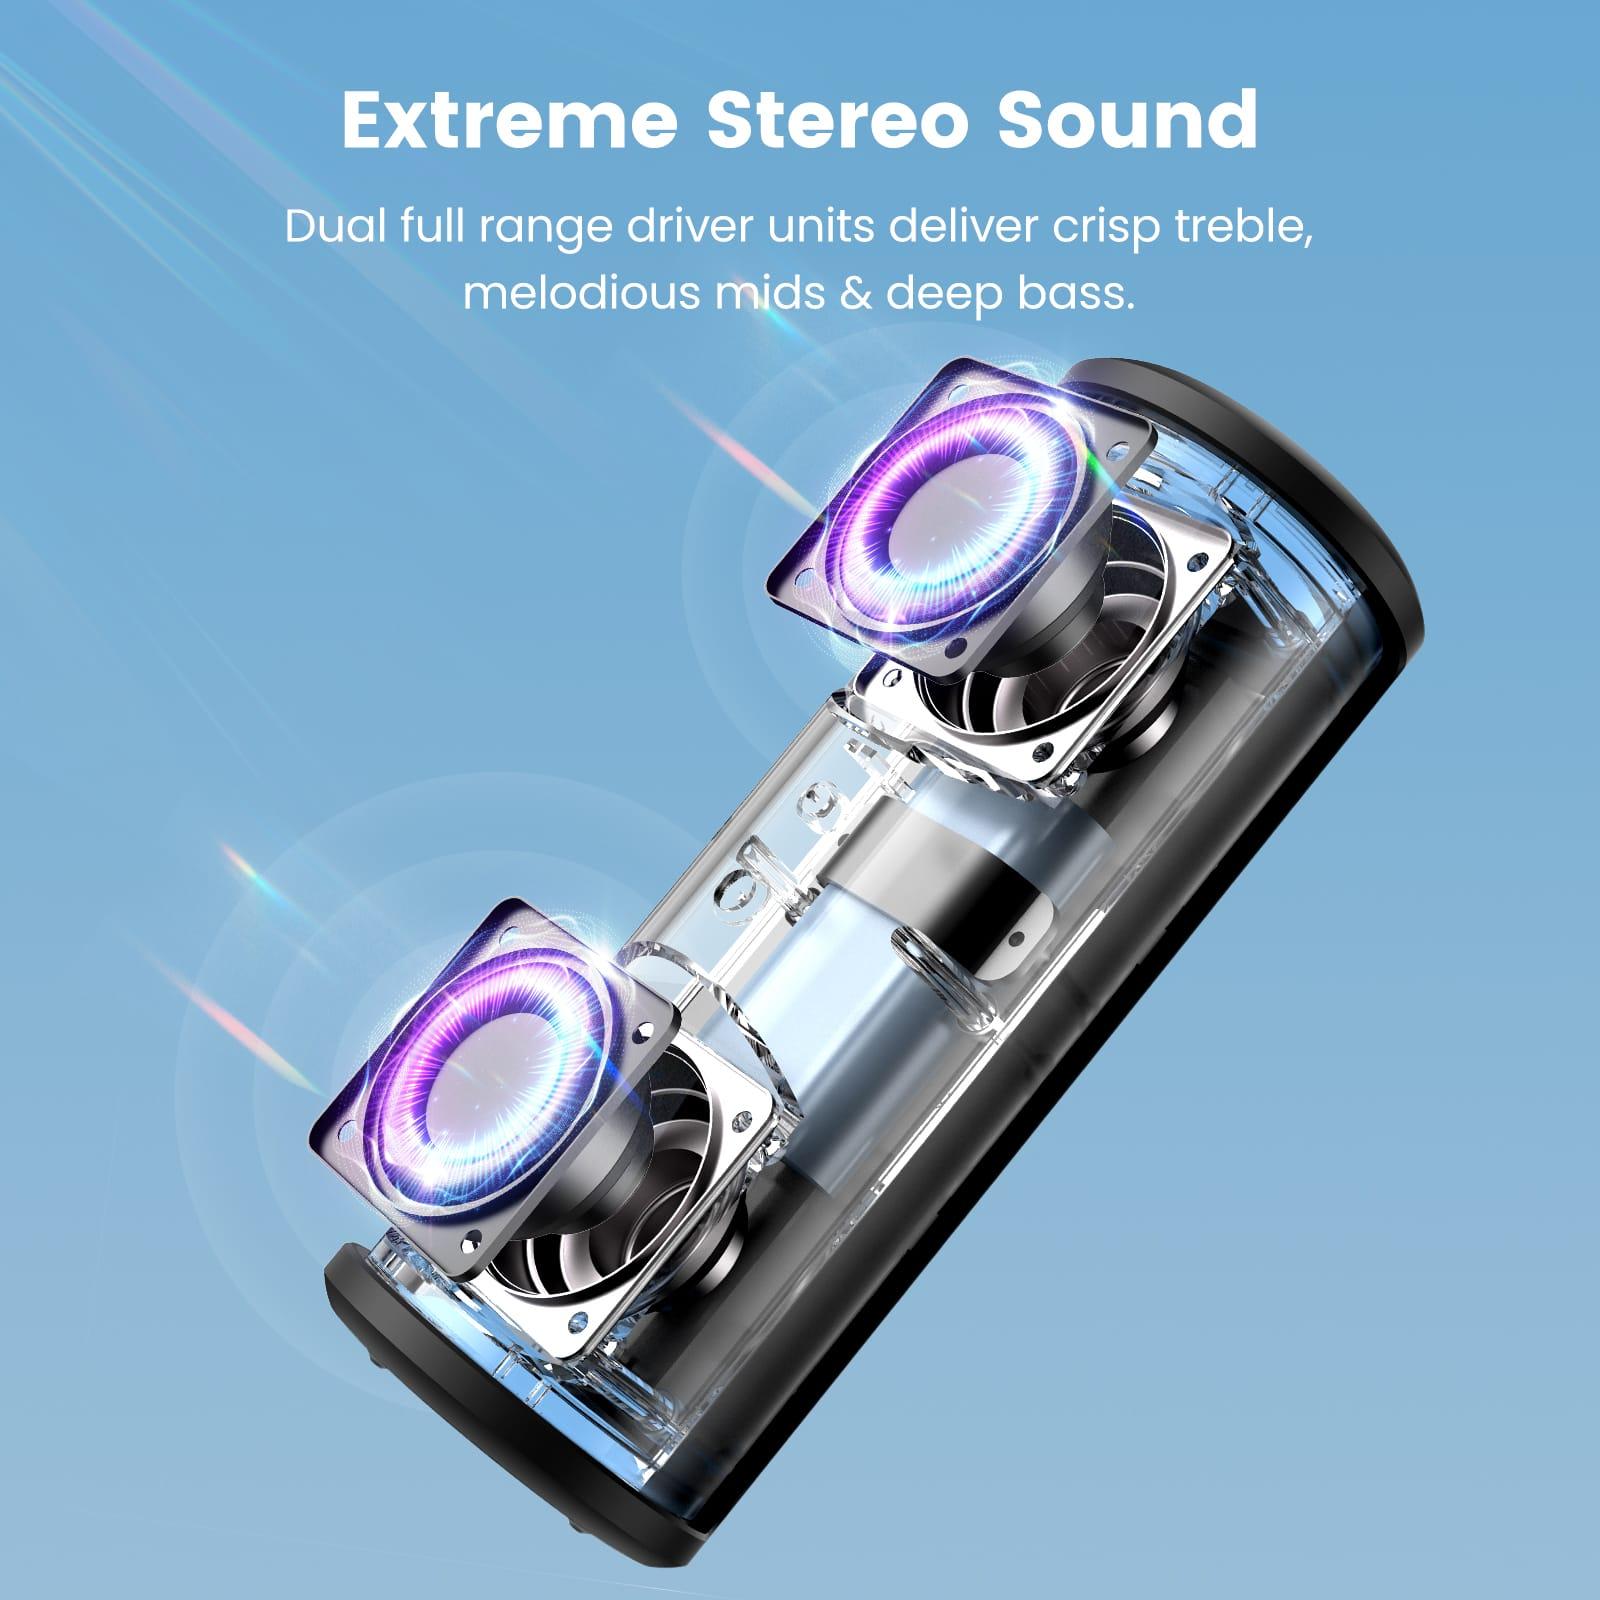 Portable wireless outdoor bluetooth speaker with lights